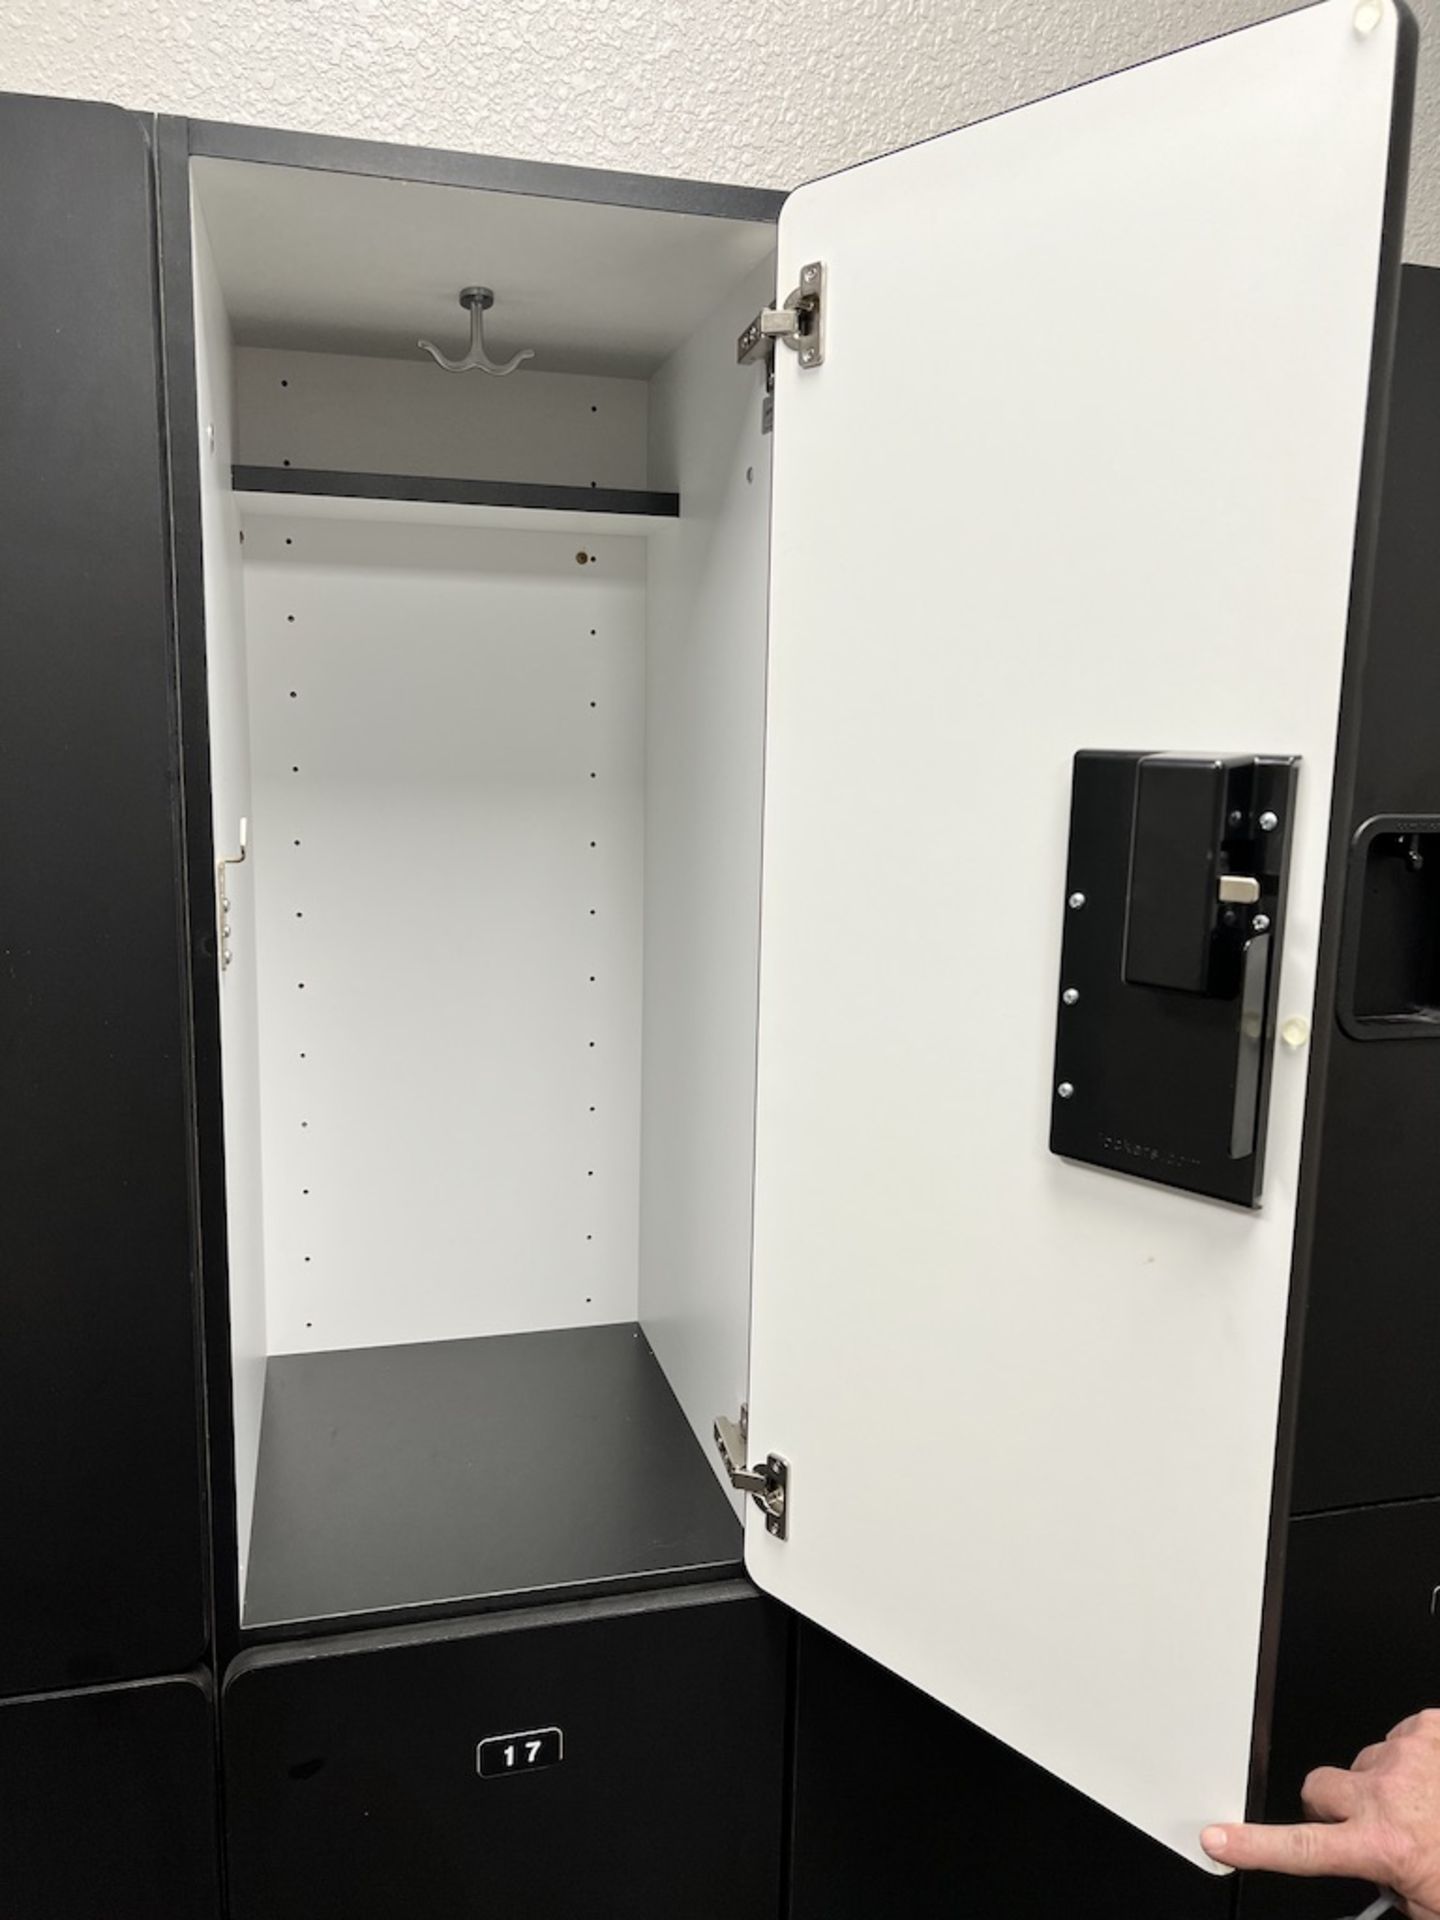 LOT OF: (4) 2 COMPARTMENT (VERTICAL) LOCKERS (BLACK) - Image 4 of 4